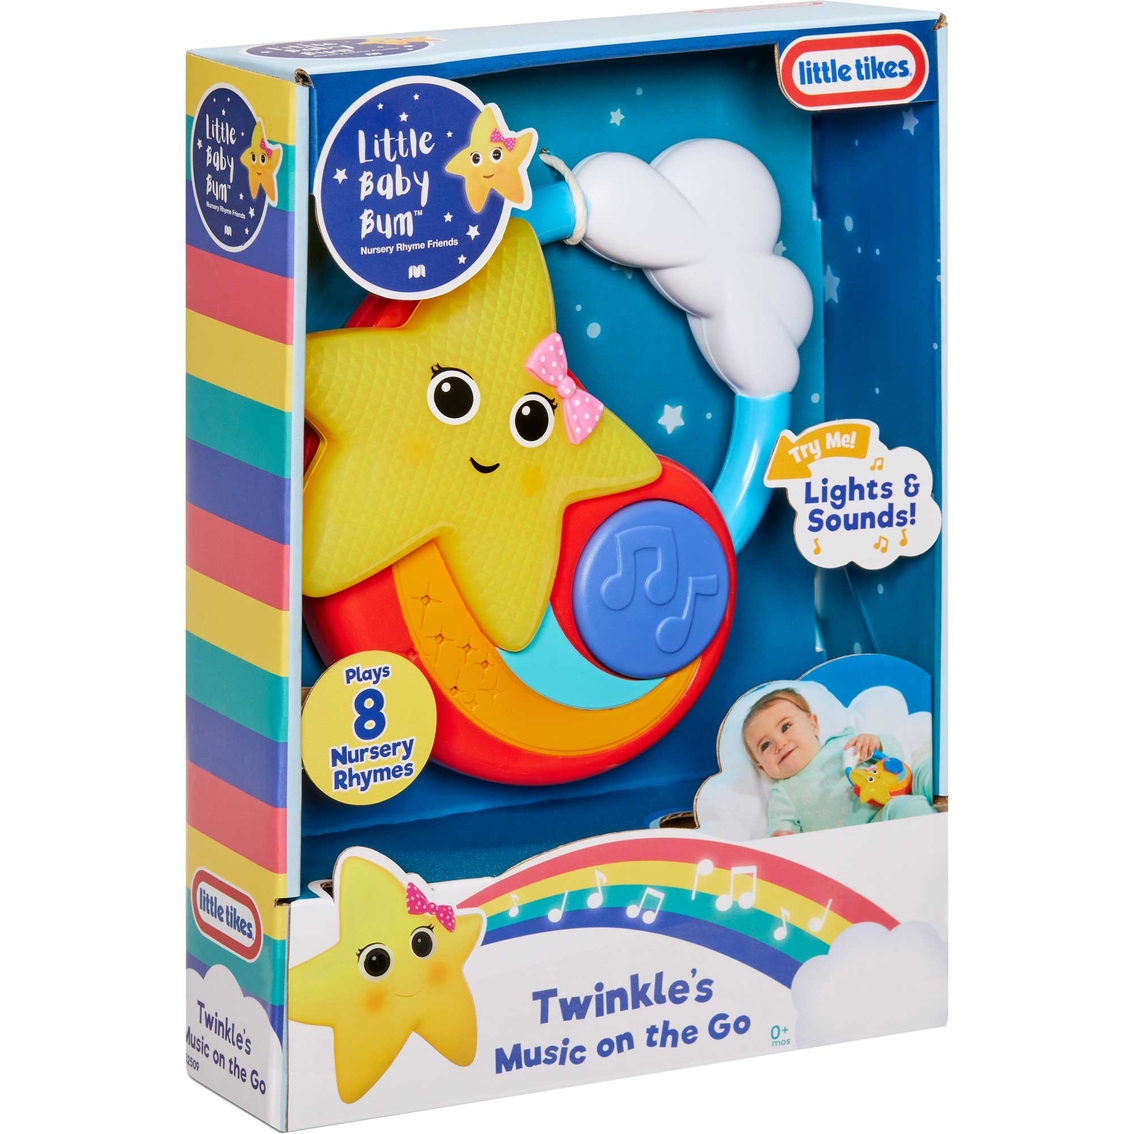 Little Tikes Little Baby Bum Twinkle's Music on the Go Infant Toy - Image 9 of 10